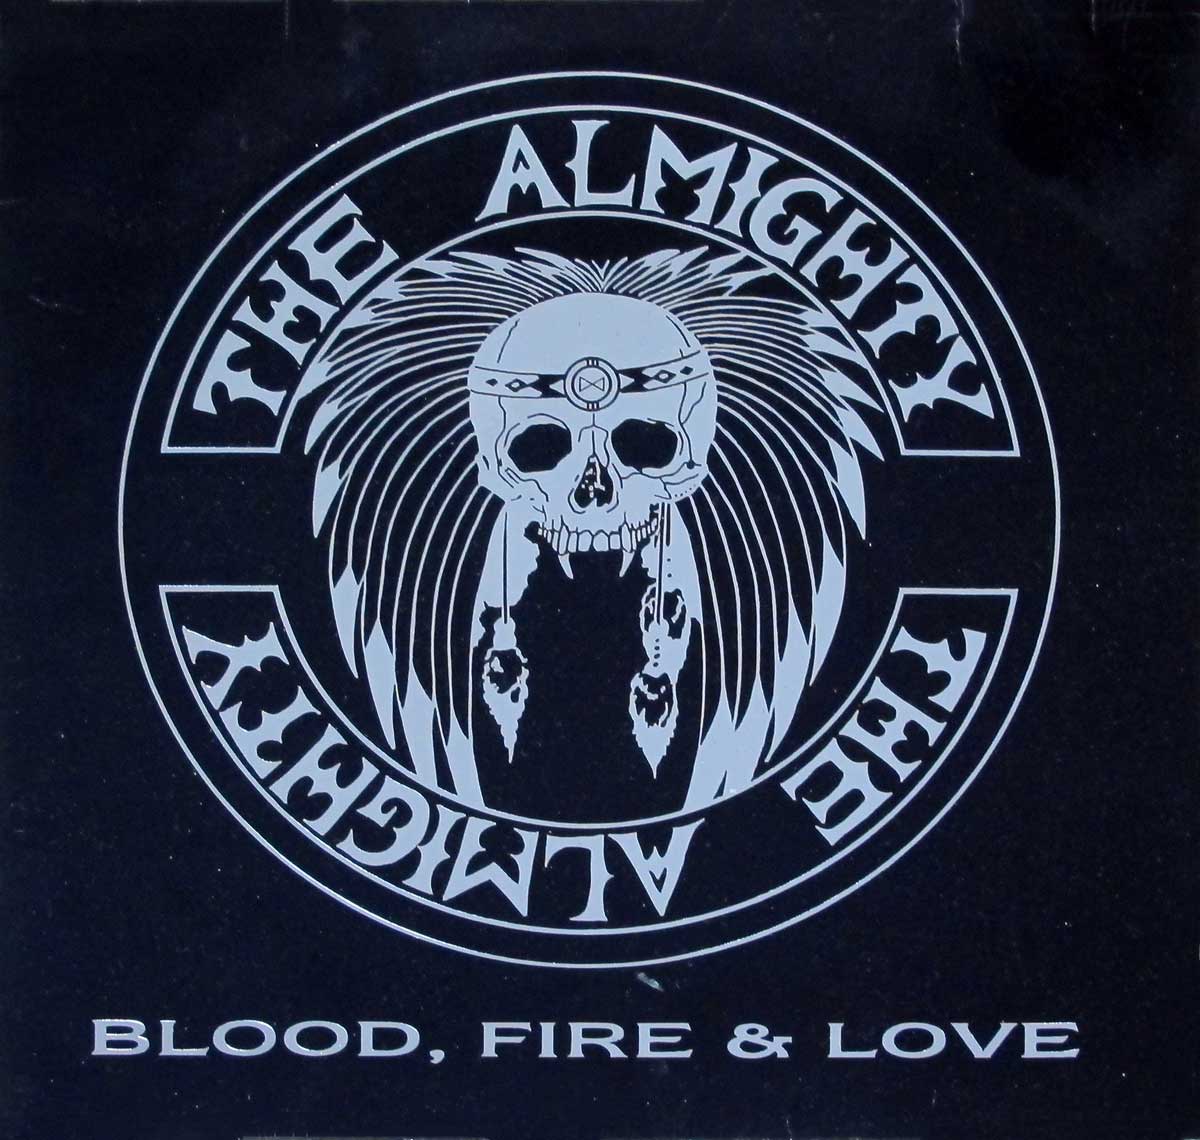 High Resolution Photo Album Front Cover of THE ALMIGHTY - Blood, Fire & Love https://vinyl-records.nl